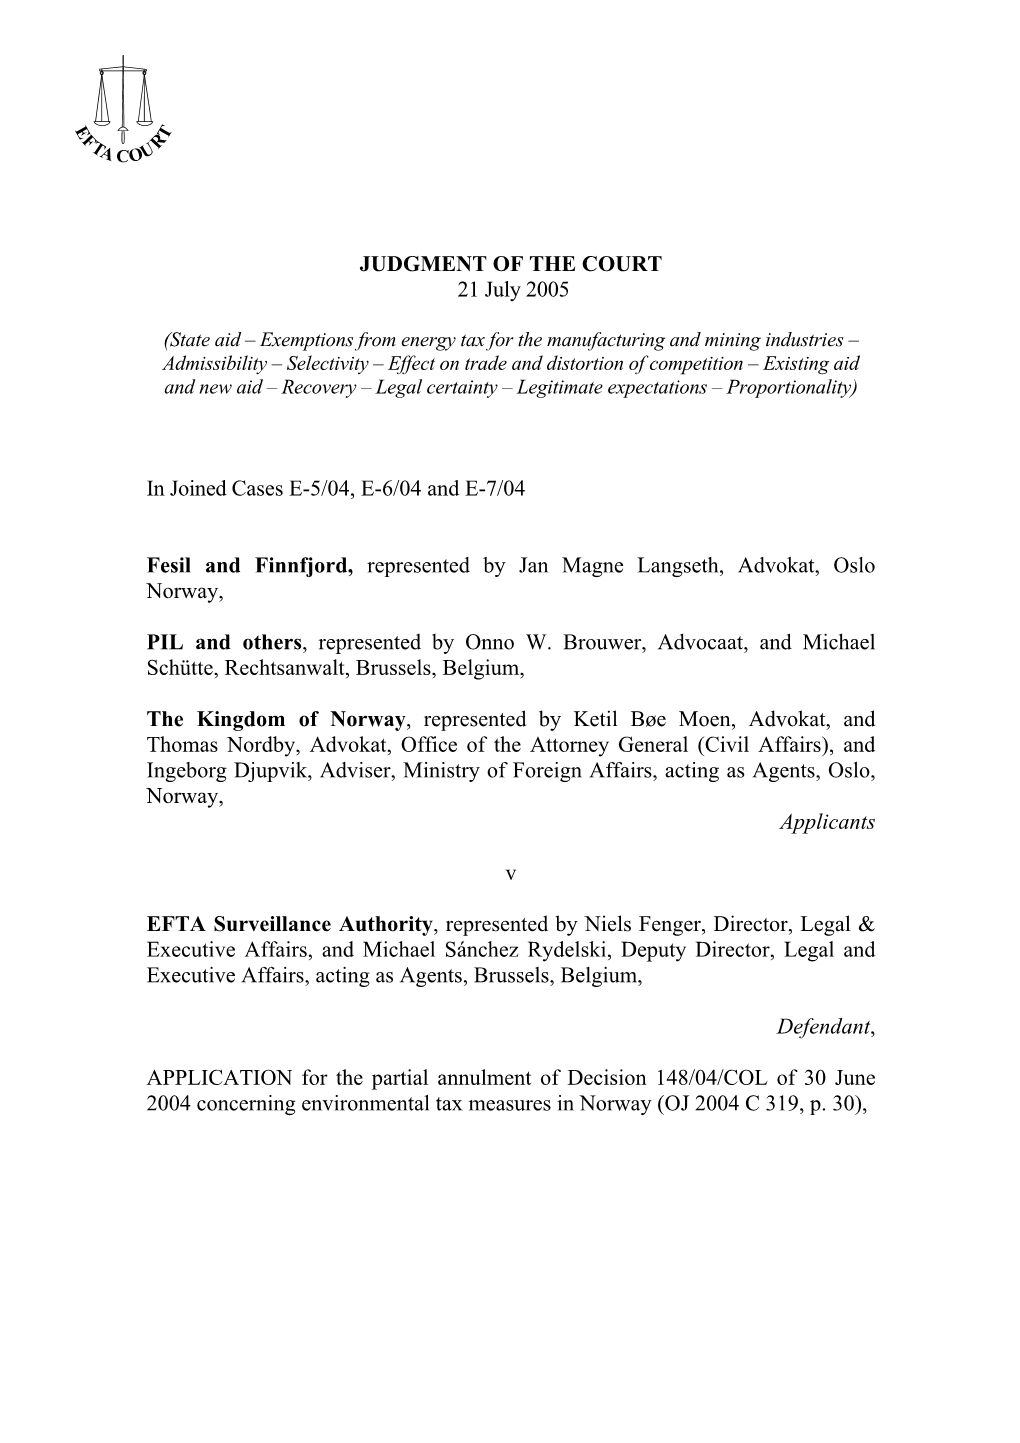 JUDGMENT of the COURT 21 July 2005 in Joined Cases E-5/04, E-6